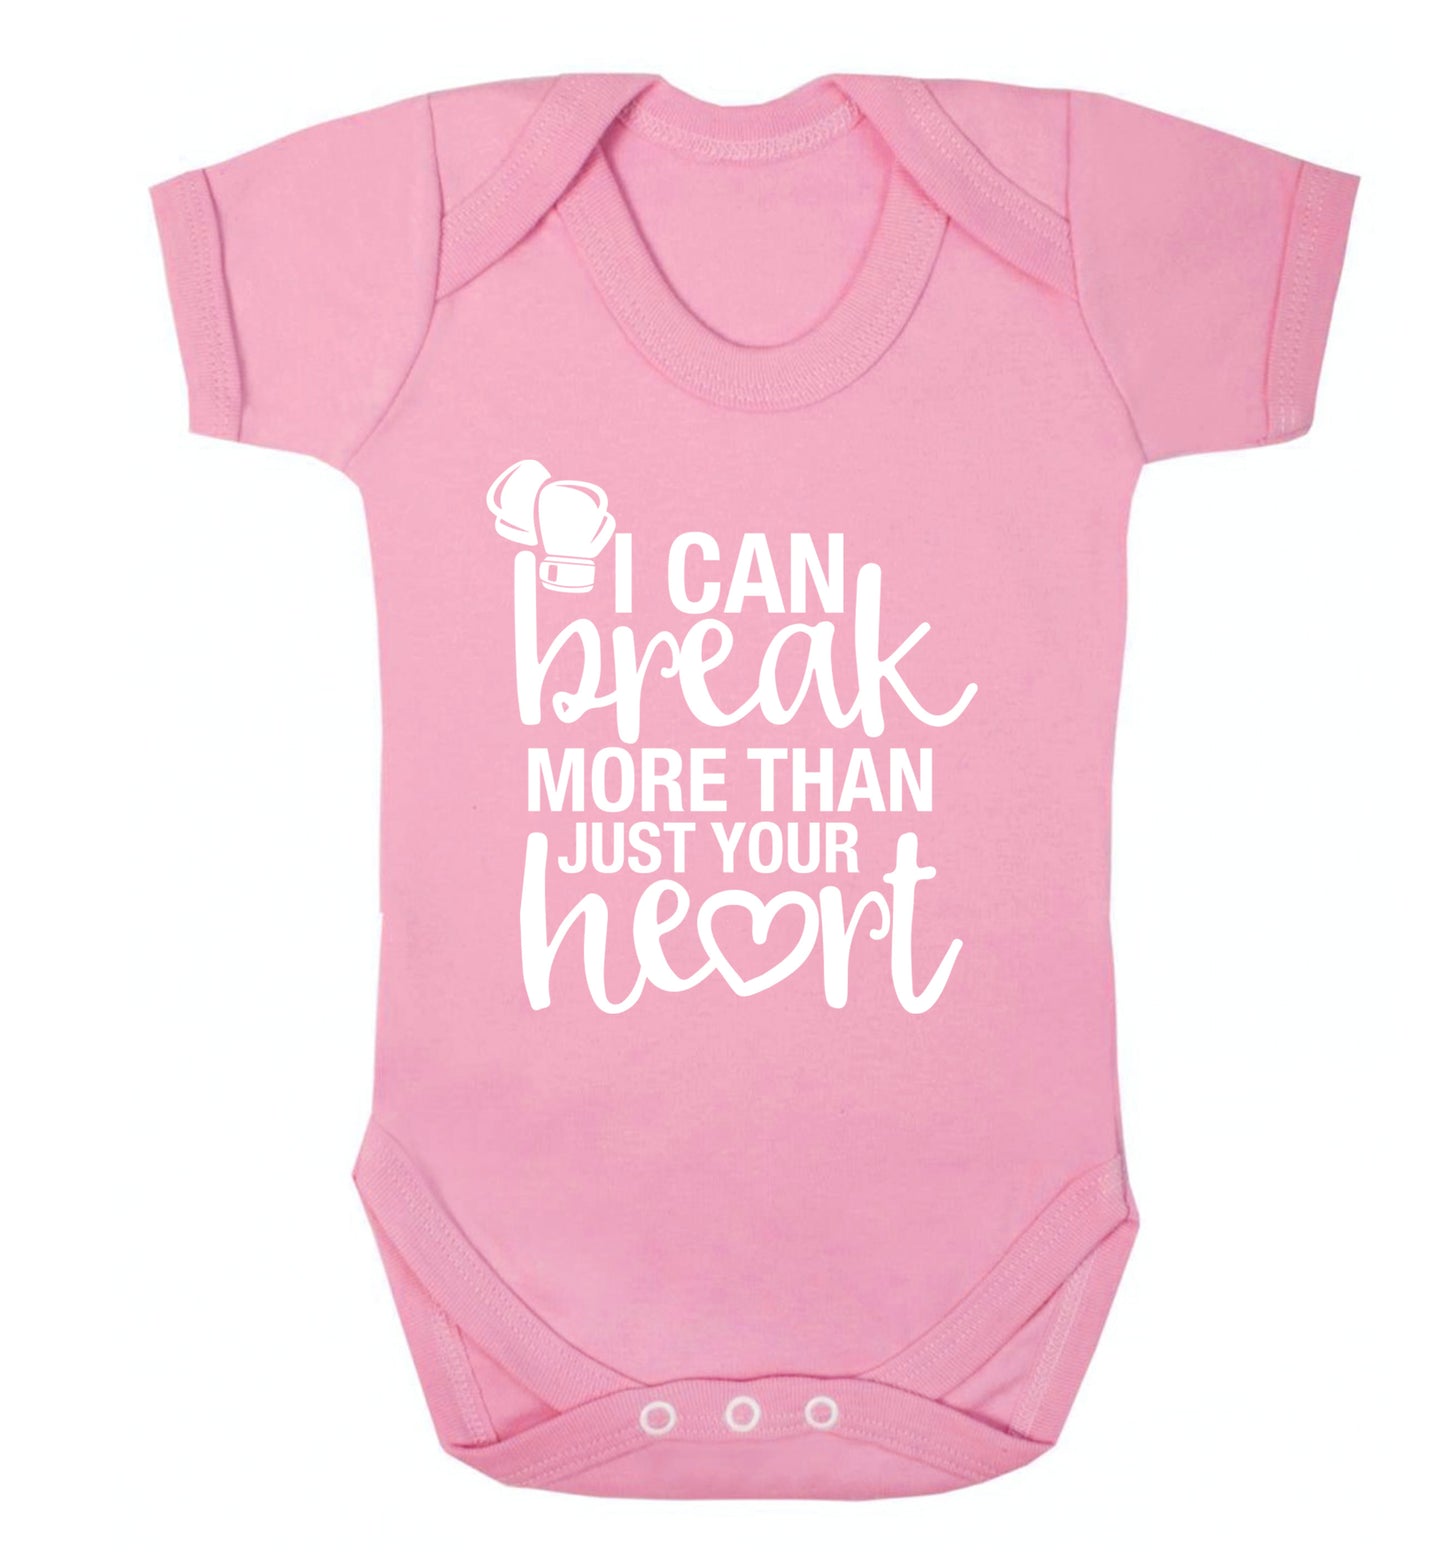 I can break more than just your heart Baby Vest pale pink 18-24 months